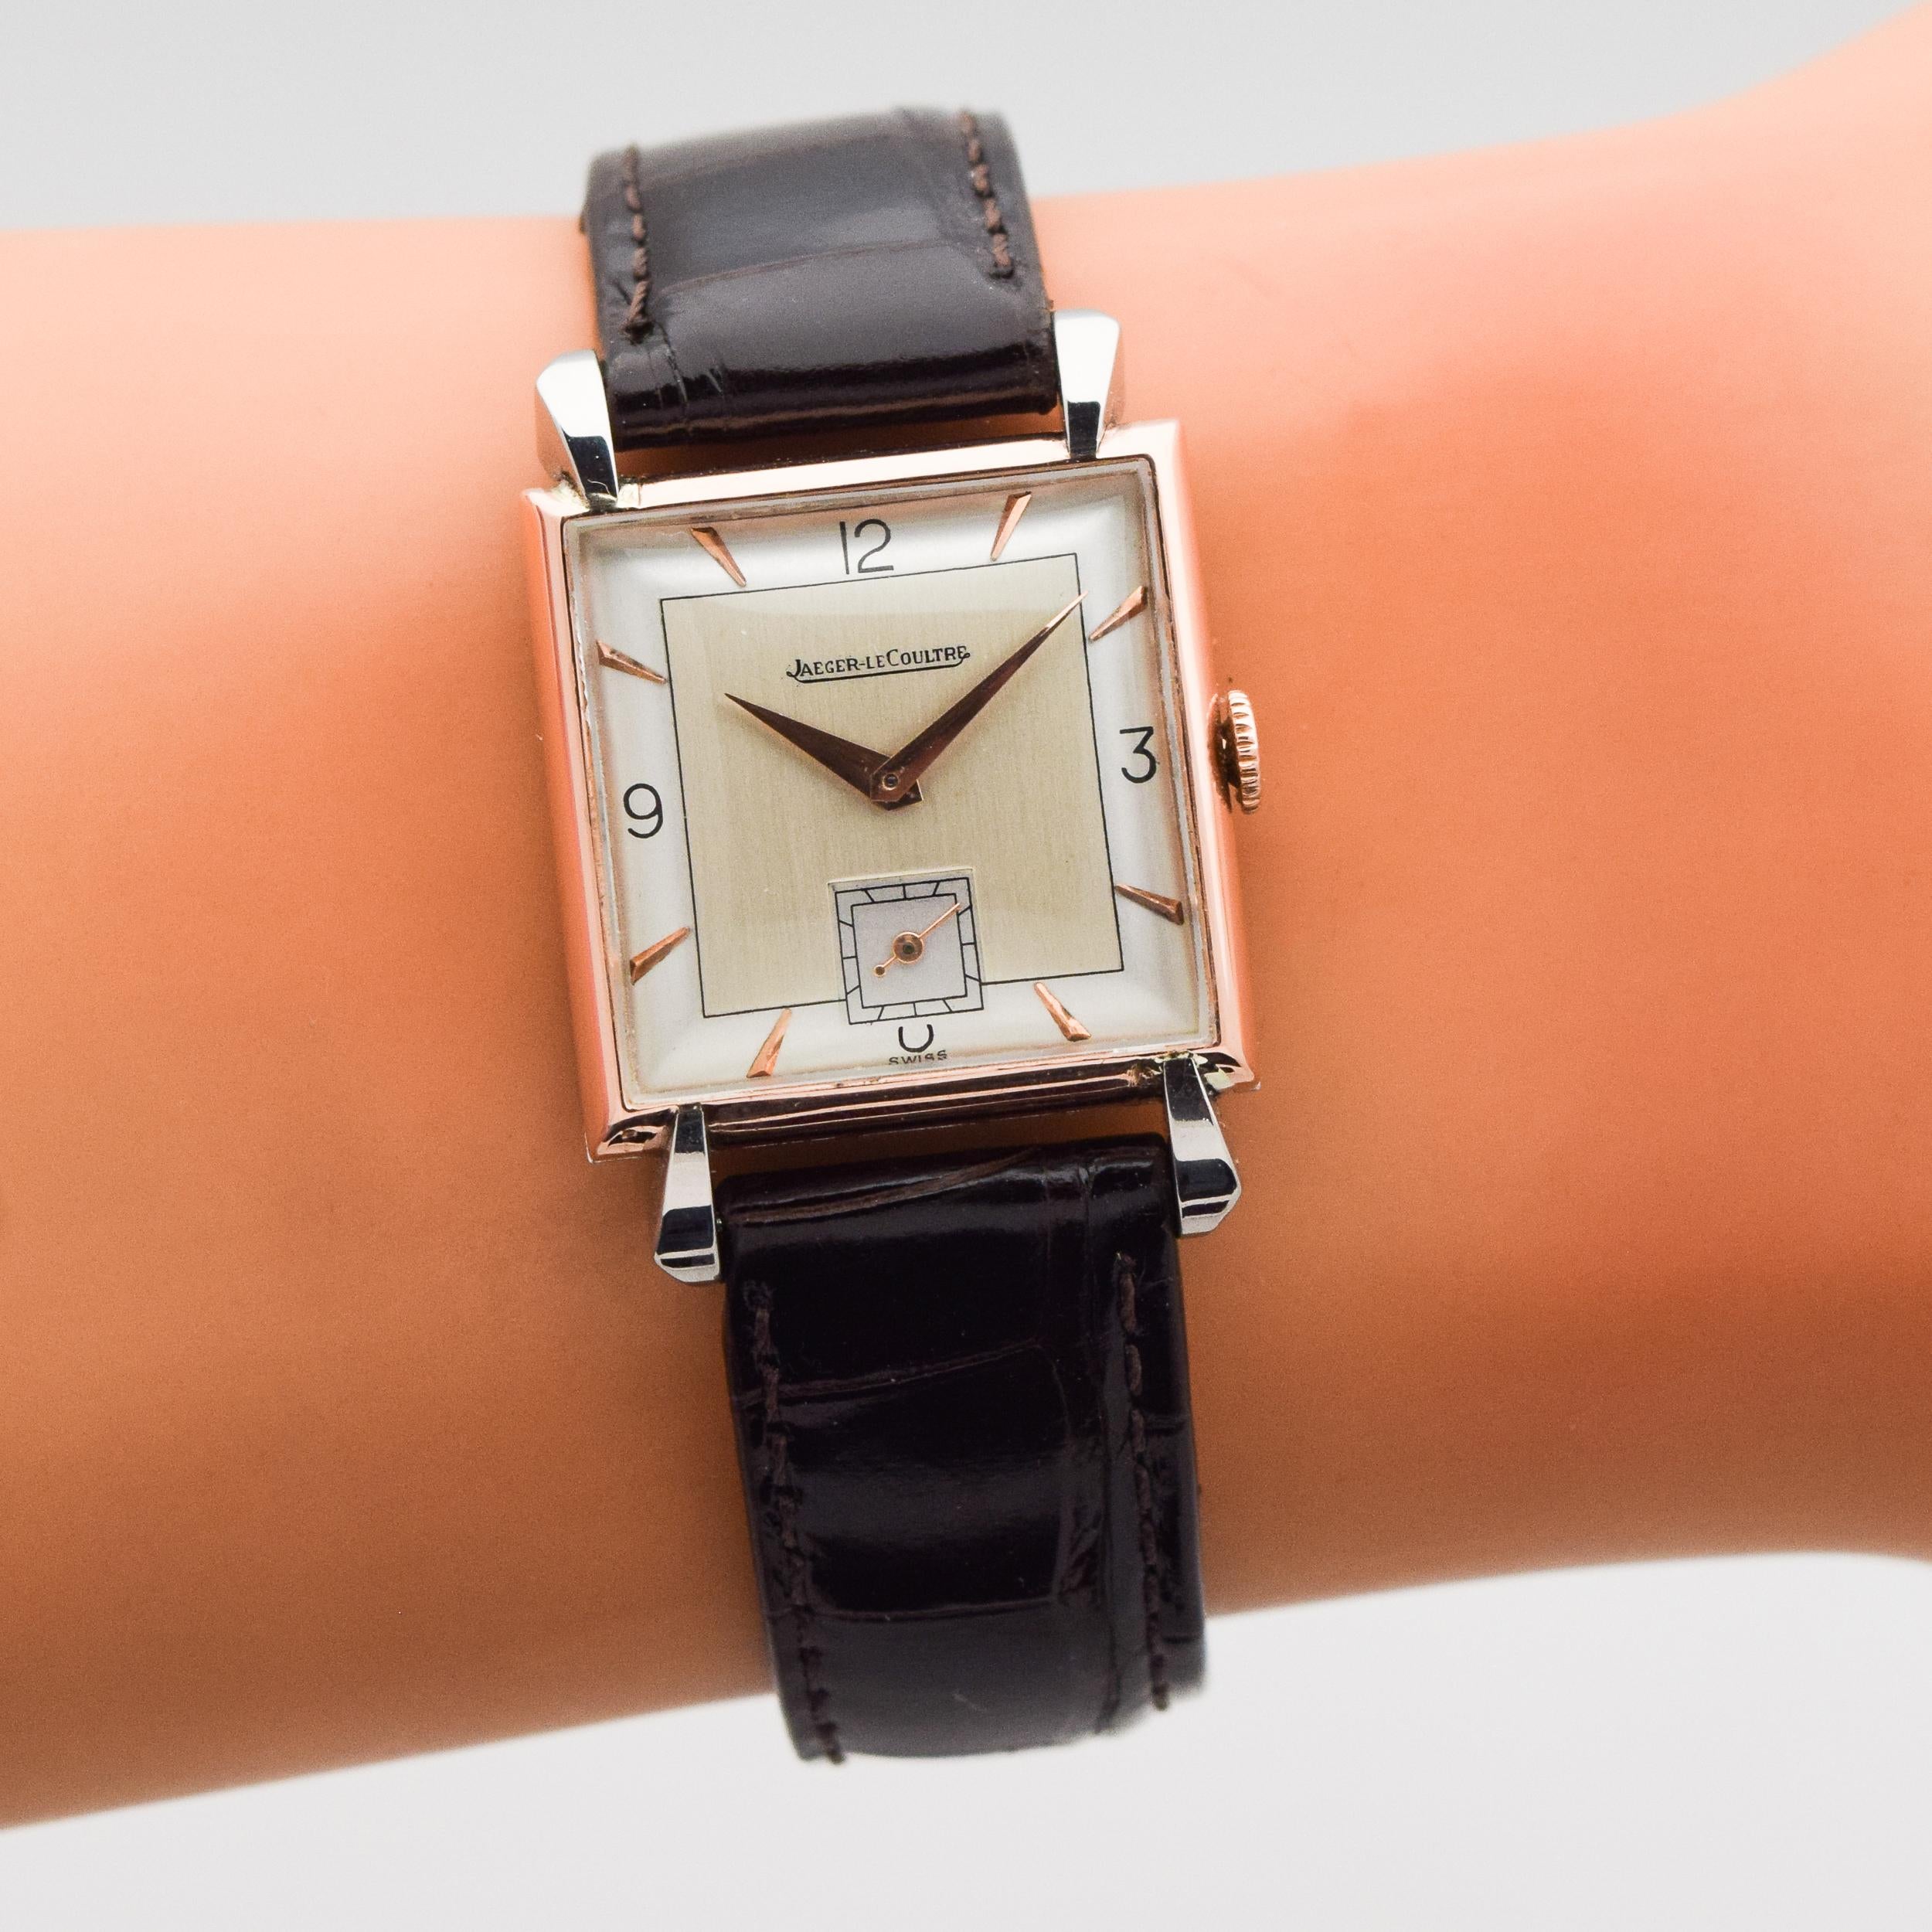 Vintage Jaeger-LeCoultre Square-Shaped Watch in 14 Karat Gold and Steel, 1940s For Sale 1